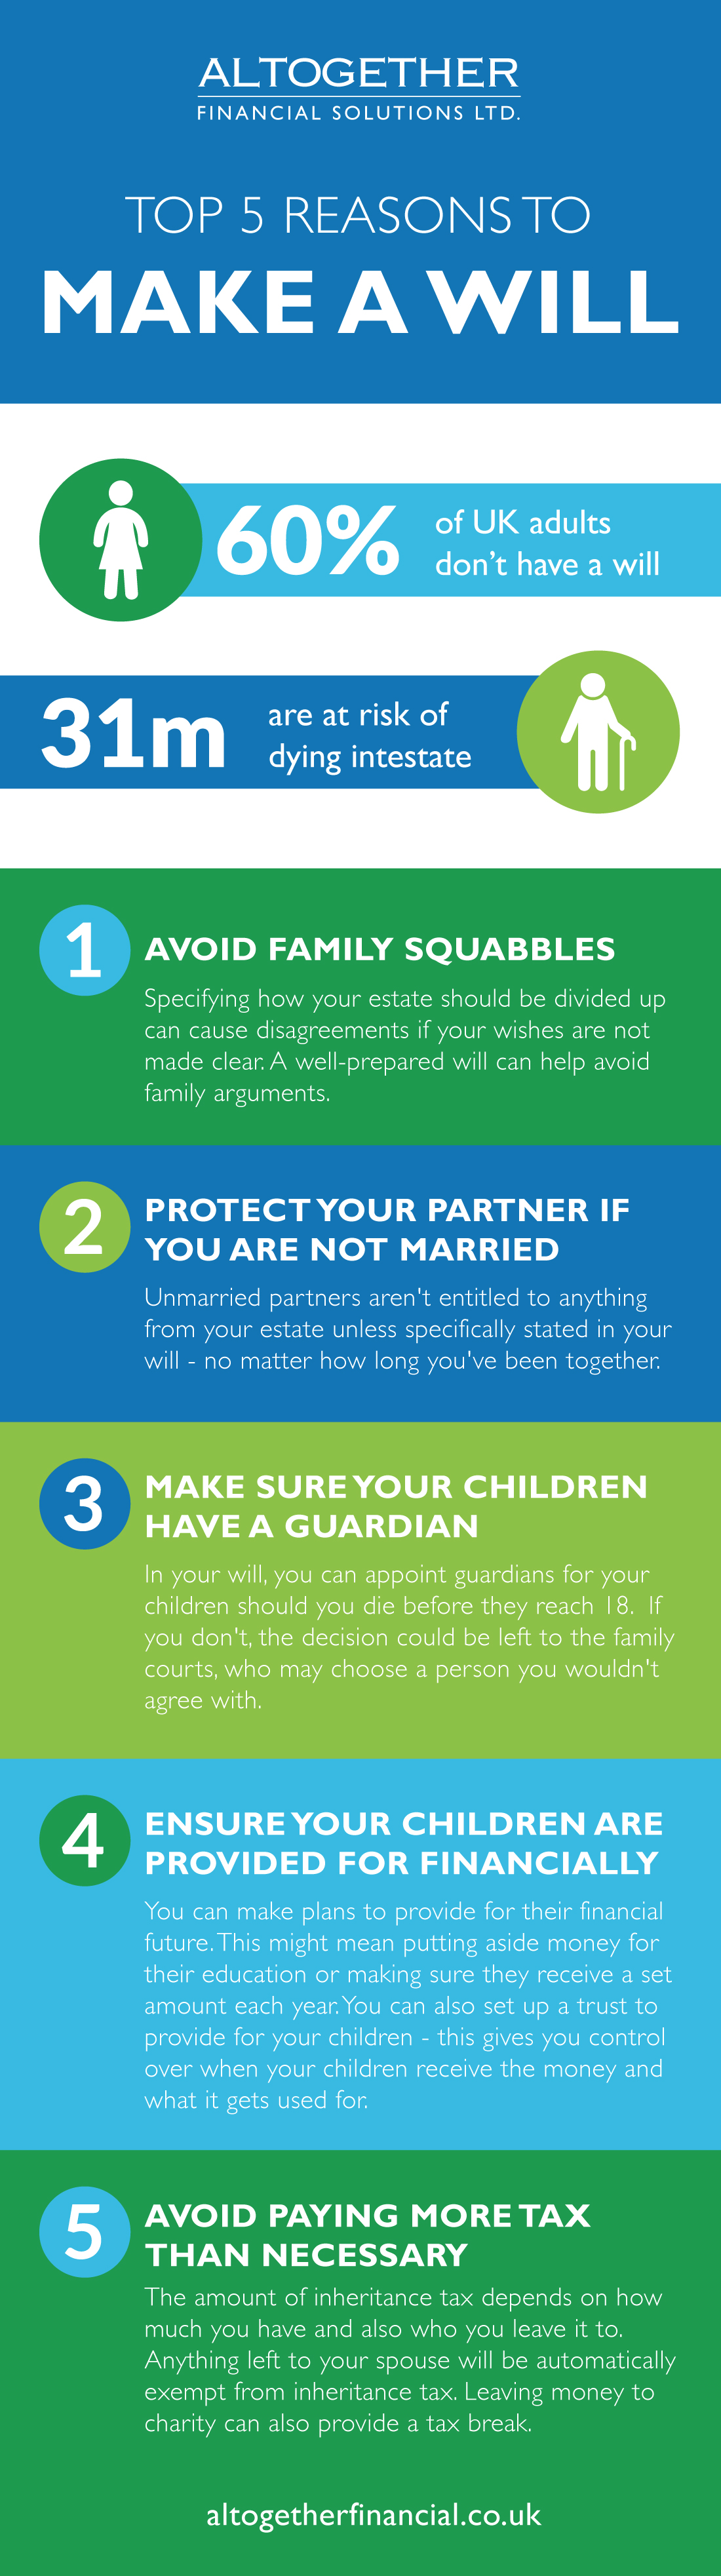 top 5 reasons to make a will infographic